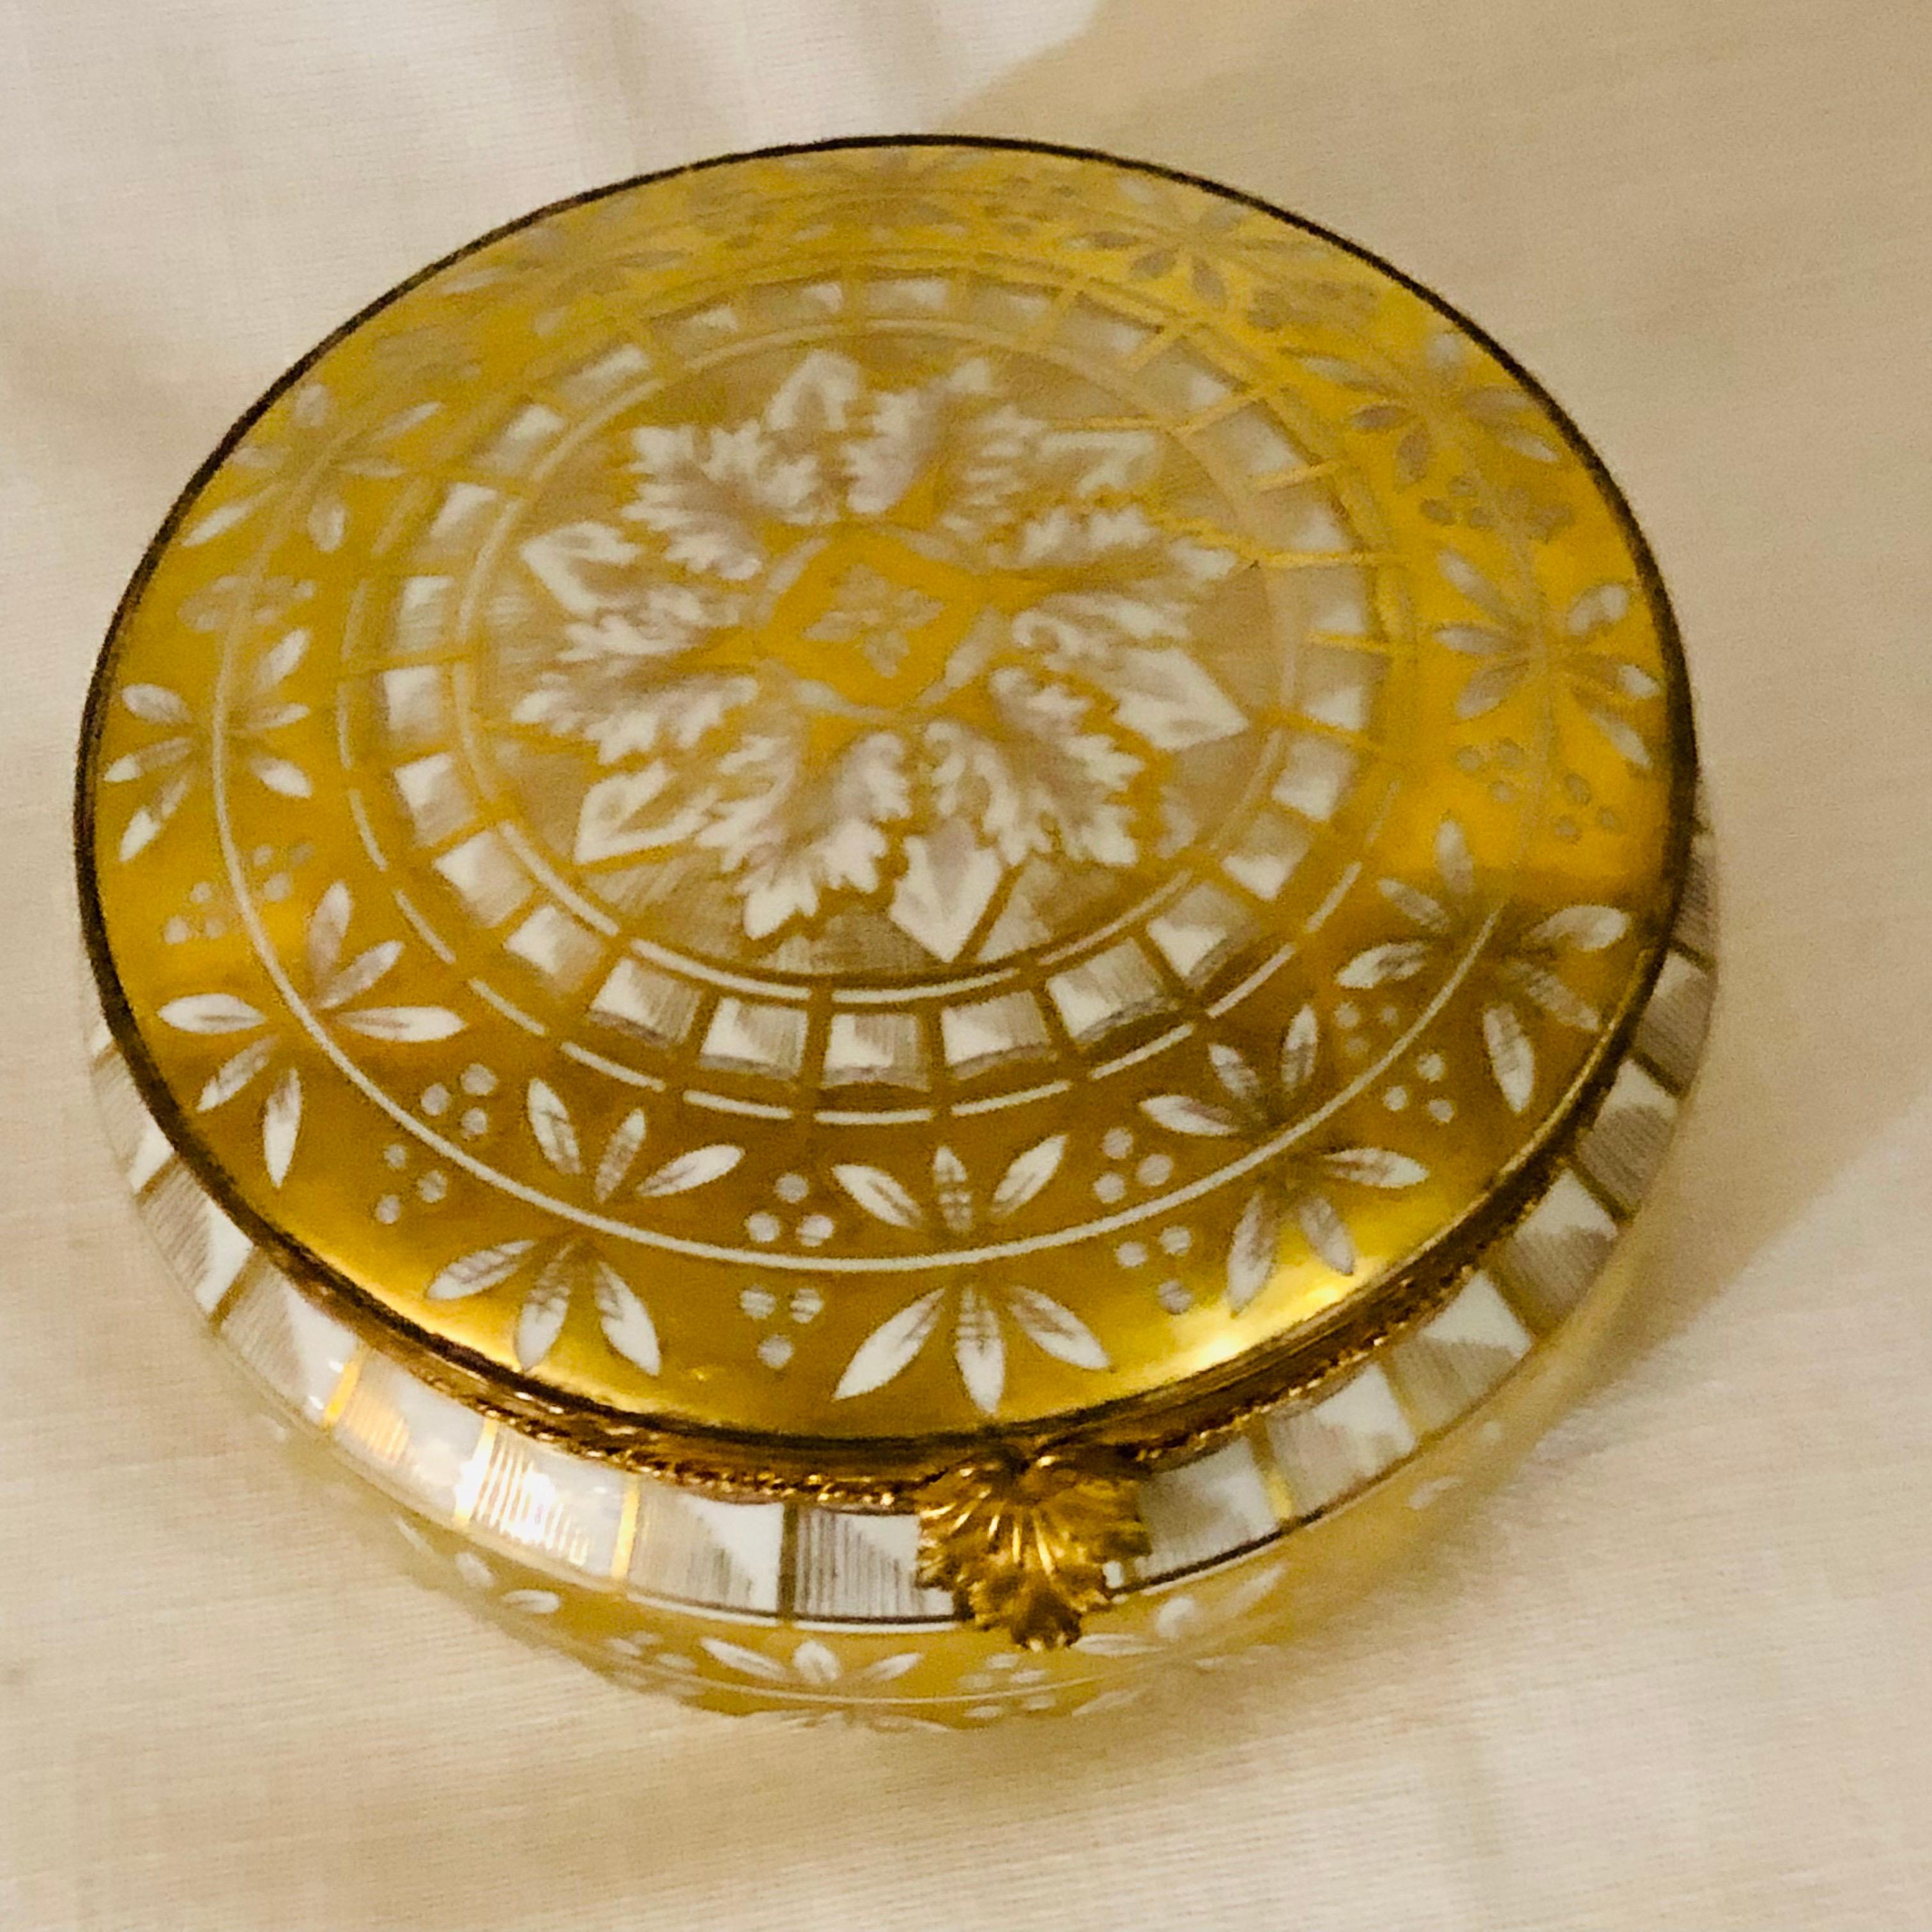 This is a stunning Le Tallec porcelain round box. It is beautifully painted with detailed gold decoration all over its sides and top. It is 6 inches in diameter. It would be a perfect place to keep your small valuable special jewelry pieces. This Le